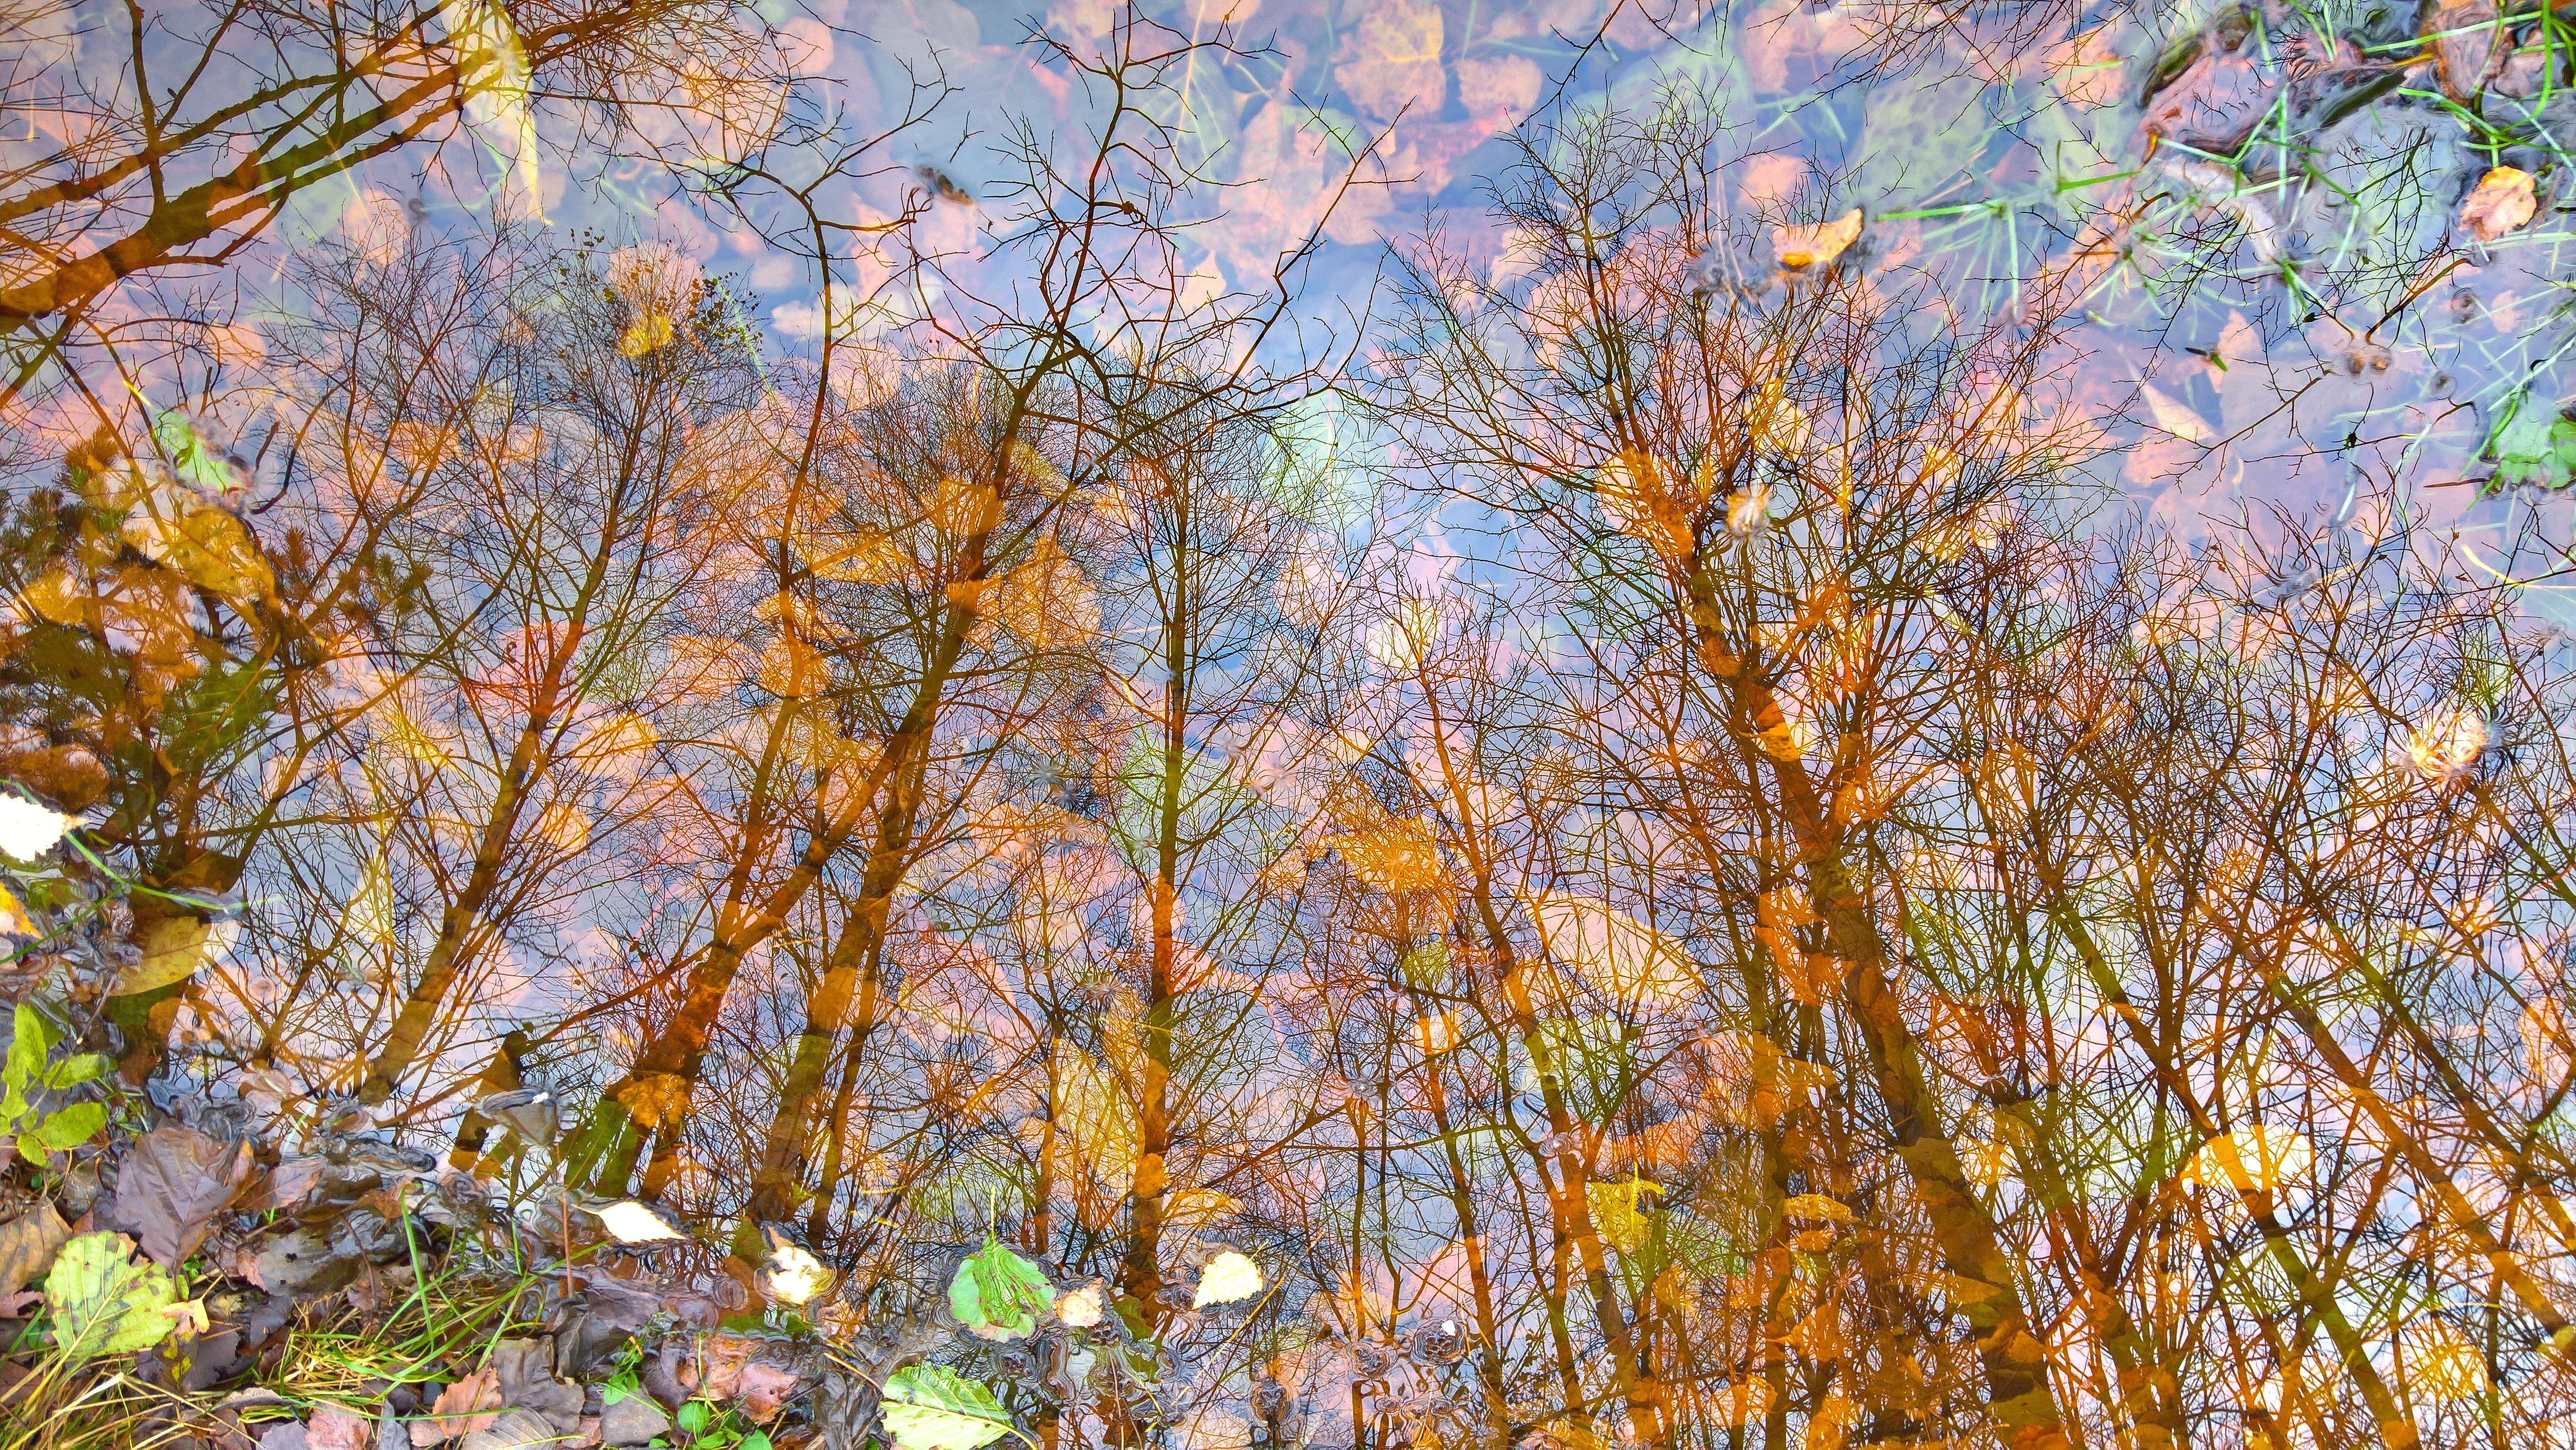 General 5344x3008 fall leaves trees water reflection double exposure